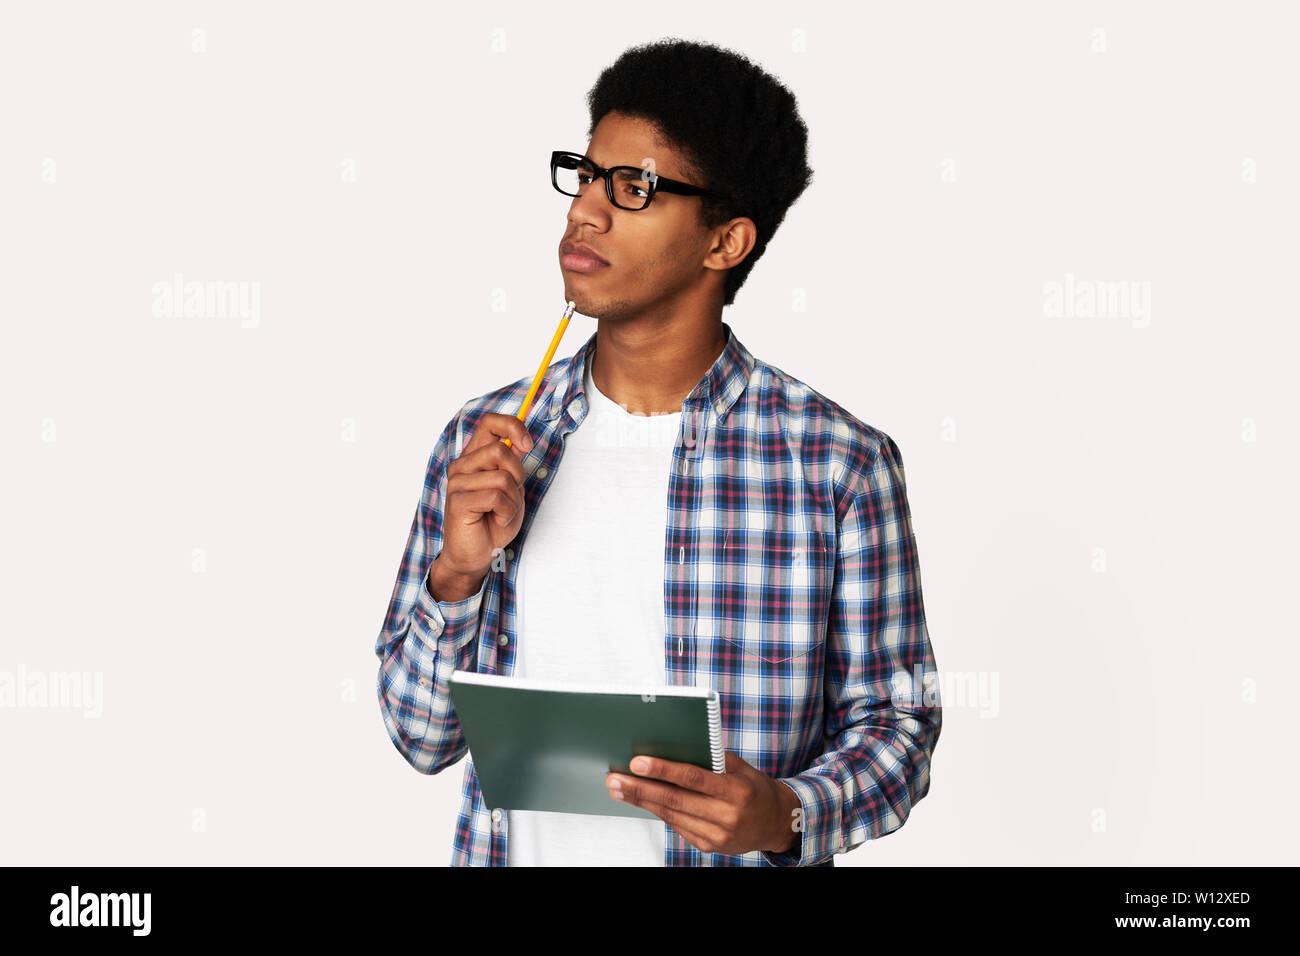 African-American Thoughtful Nerd Thinking about Test in Studio Stock Photo